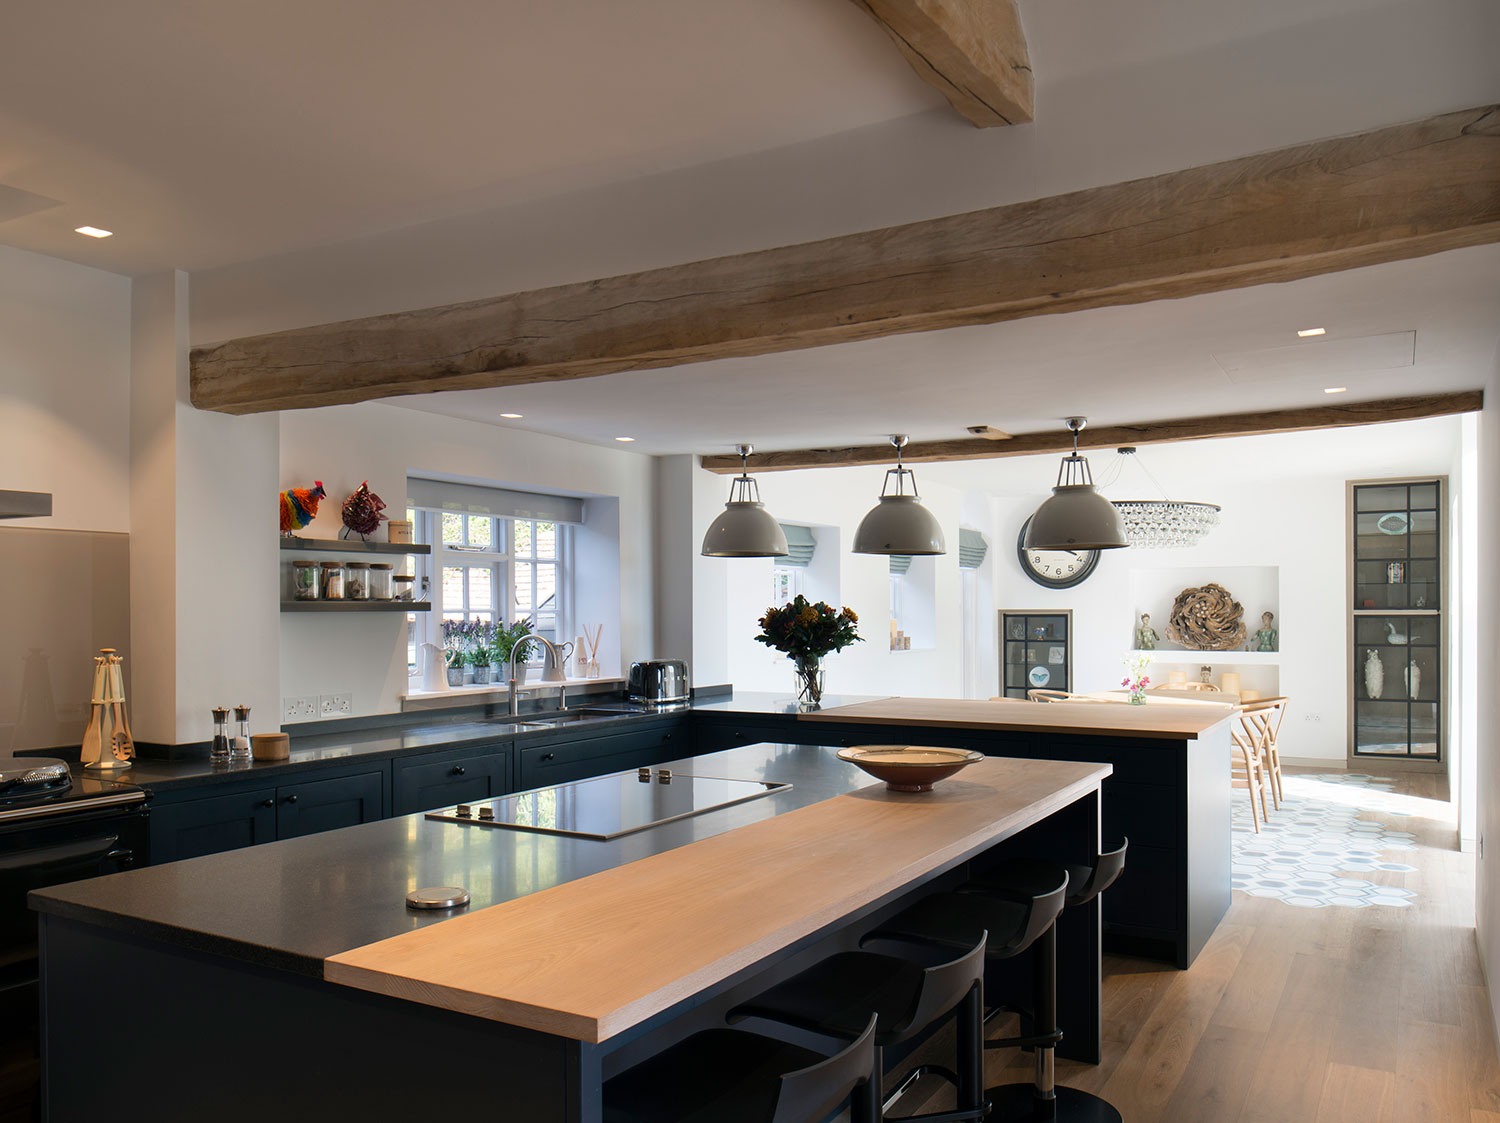 High end kitchen within a refurbished interior design project in Oxfordshire